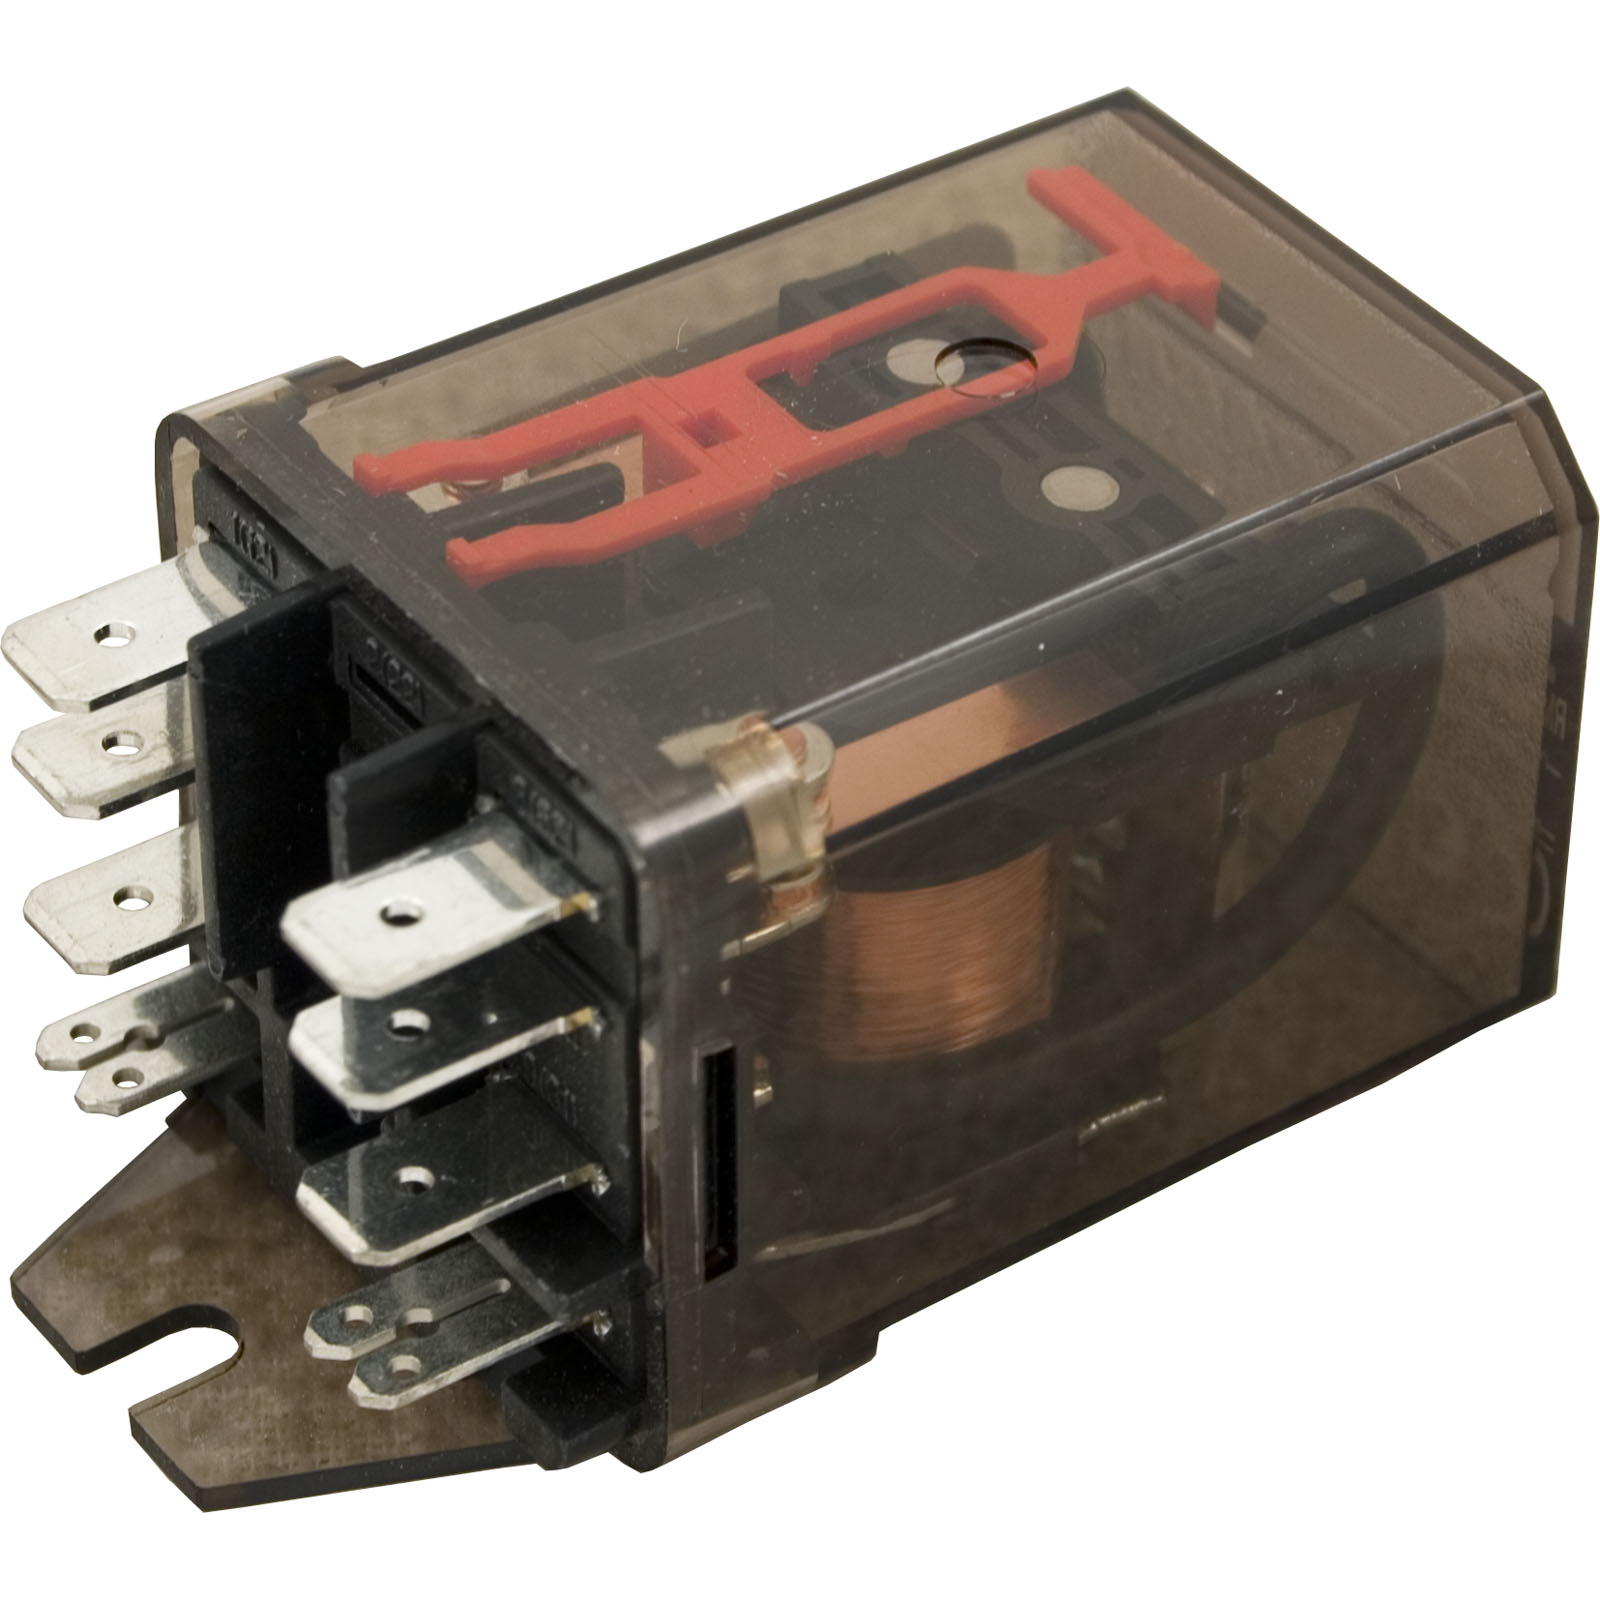 Picture of RM205-615 Relay Schrack DPDT 15A 115v 1/4 Dustcover